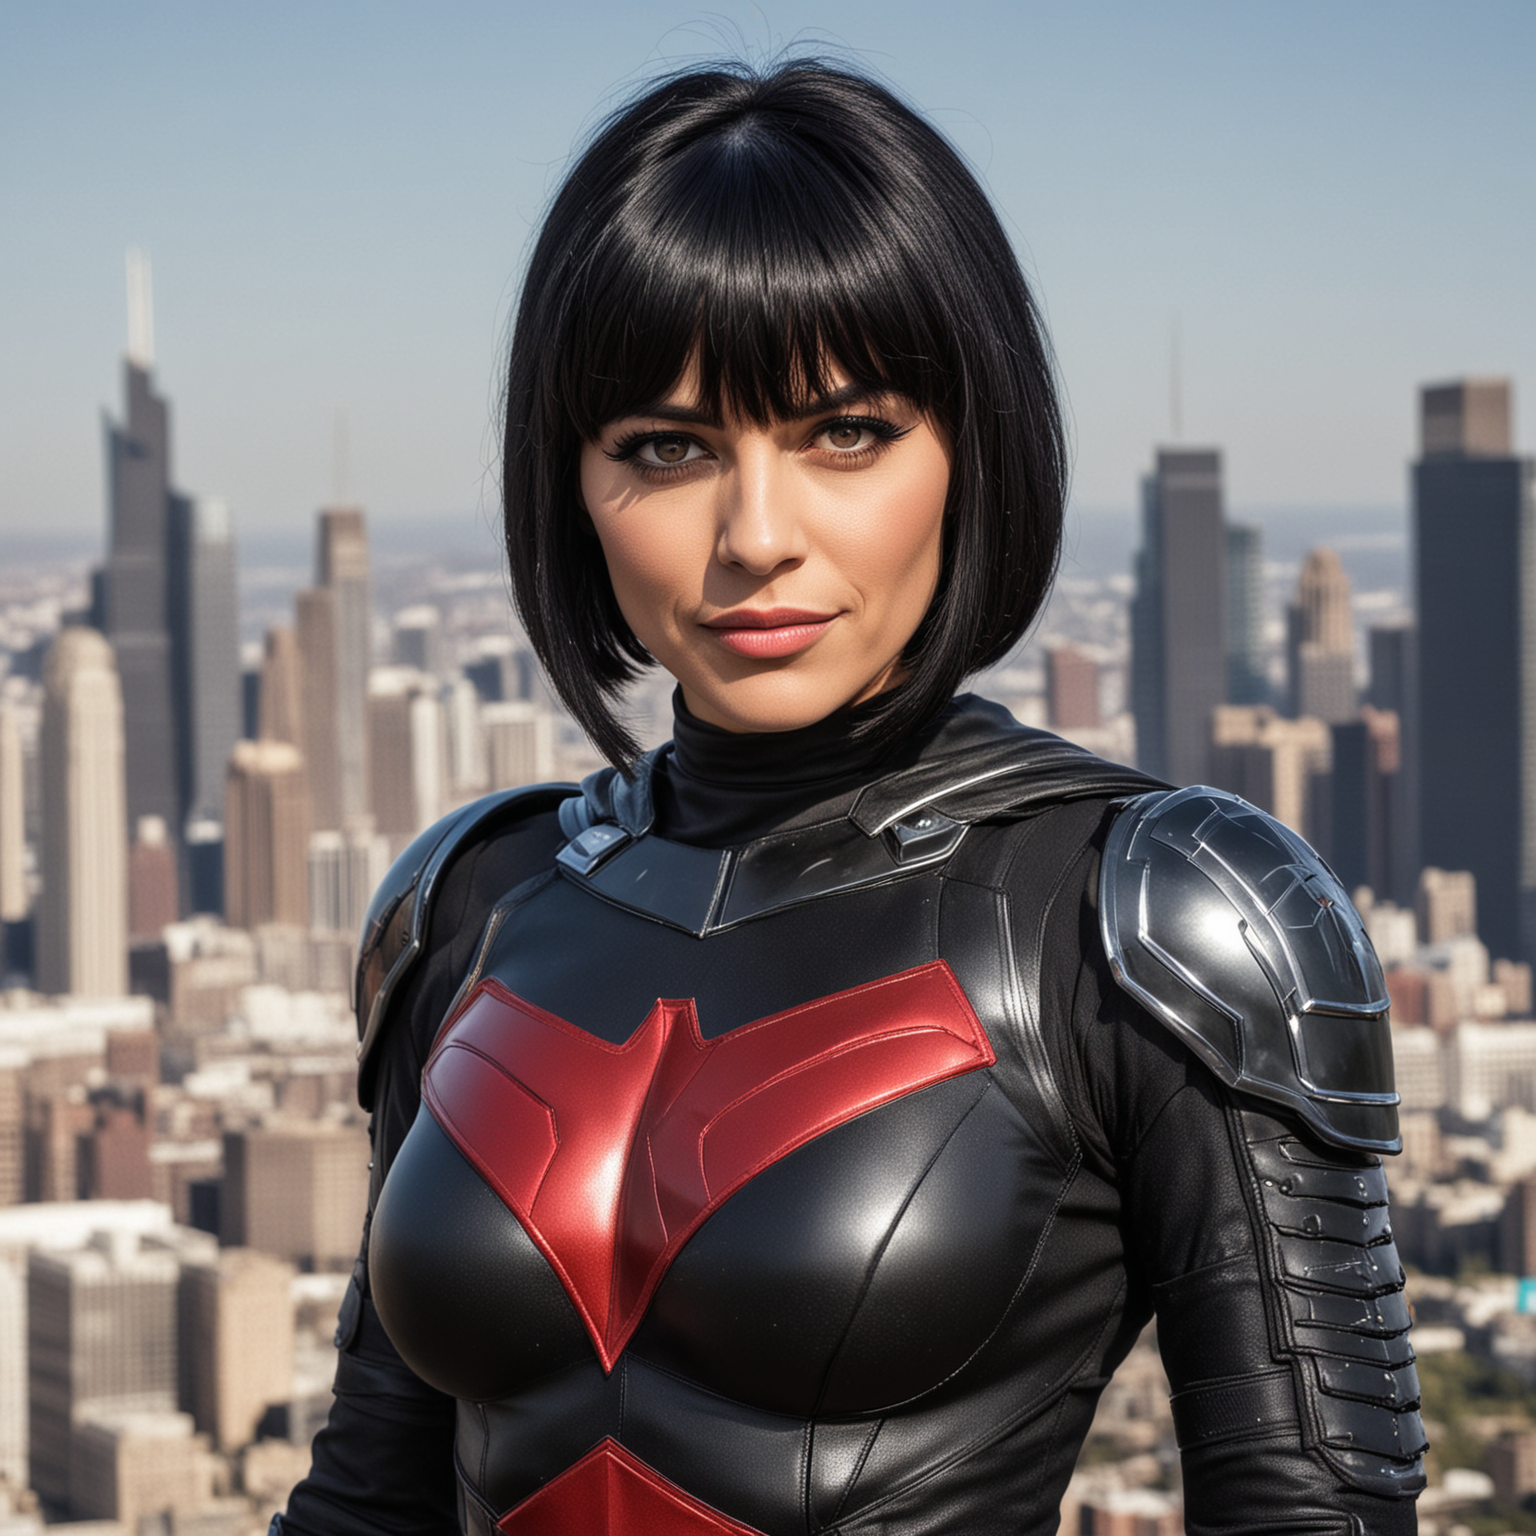 super hero woman bob cut  shoulder length with bangs black haor in her sixties , looking directly at camera still can see his face ,
dressed in super hero suit with belt the suit in black, little red and little blue , armor , belt, in eclipse skyline waist up
